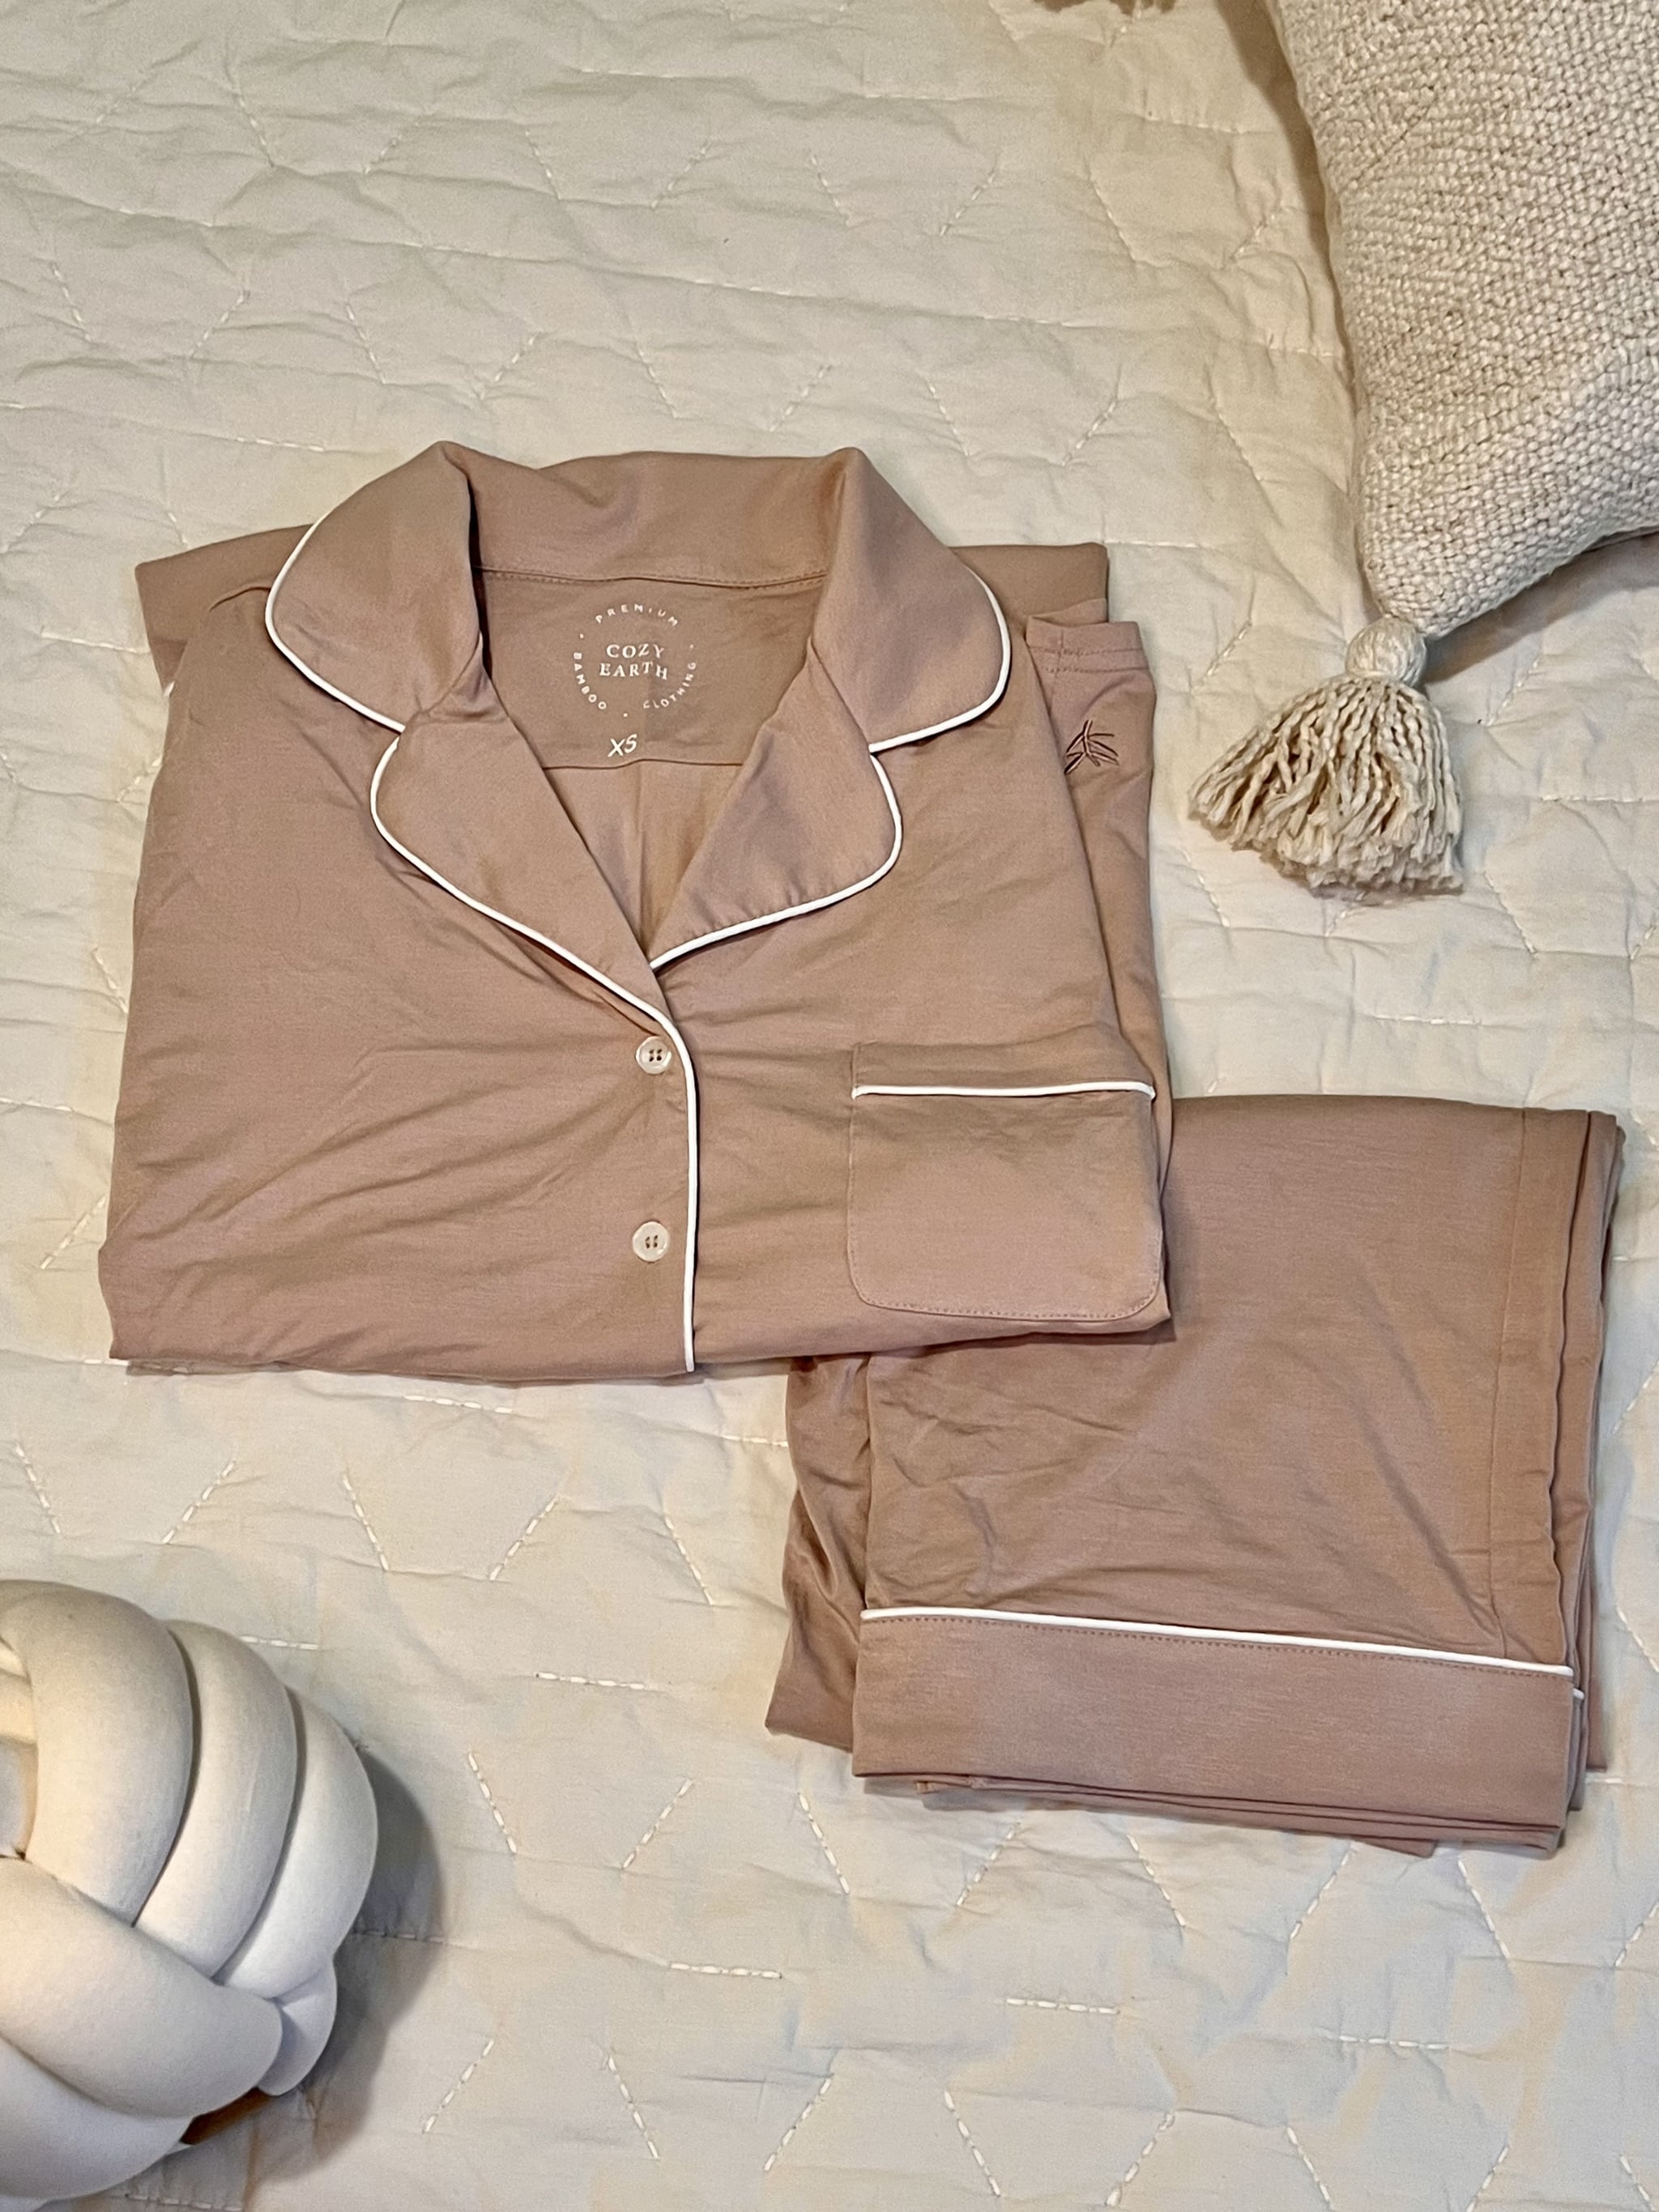 Cozy Earth Bamboo Pajama Set on bed.